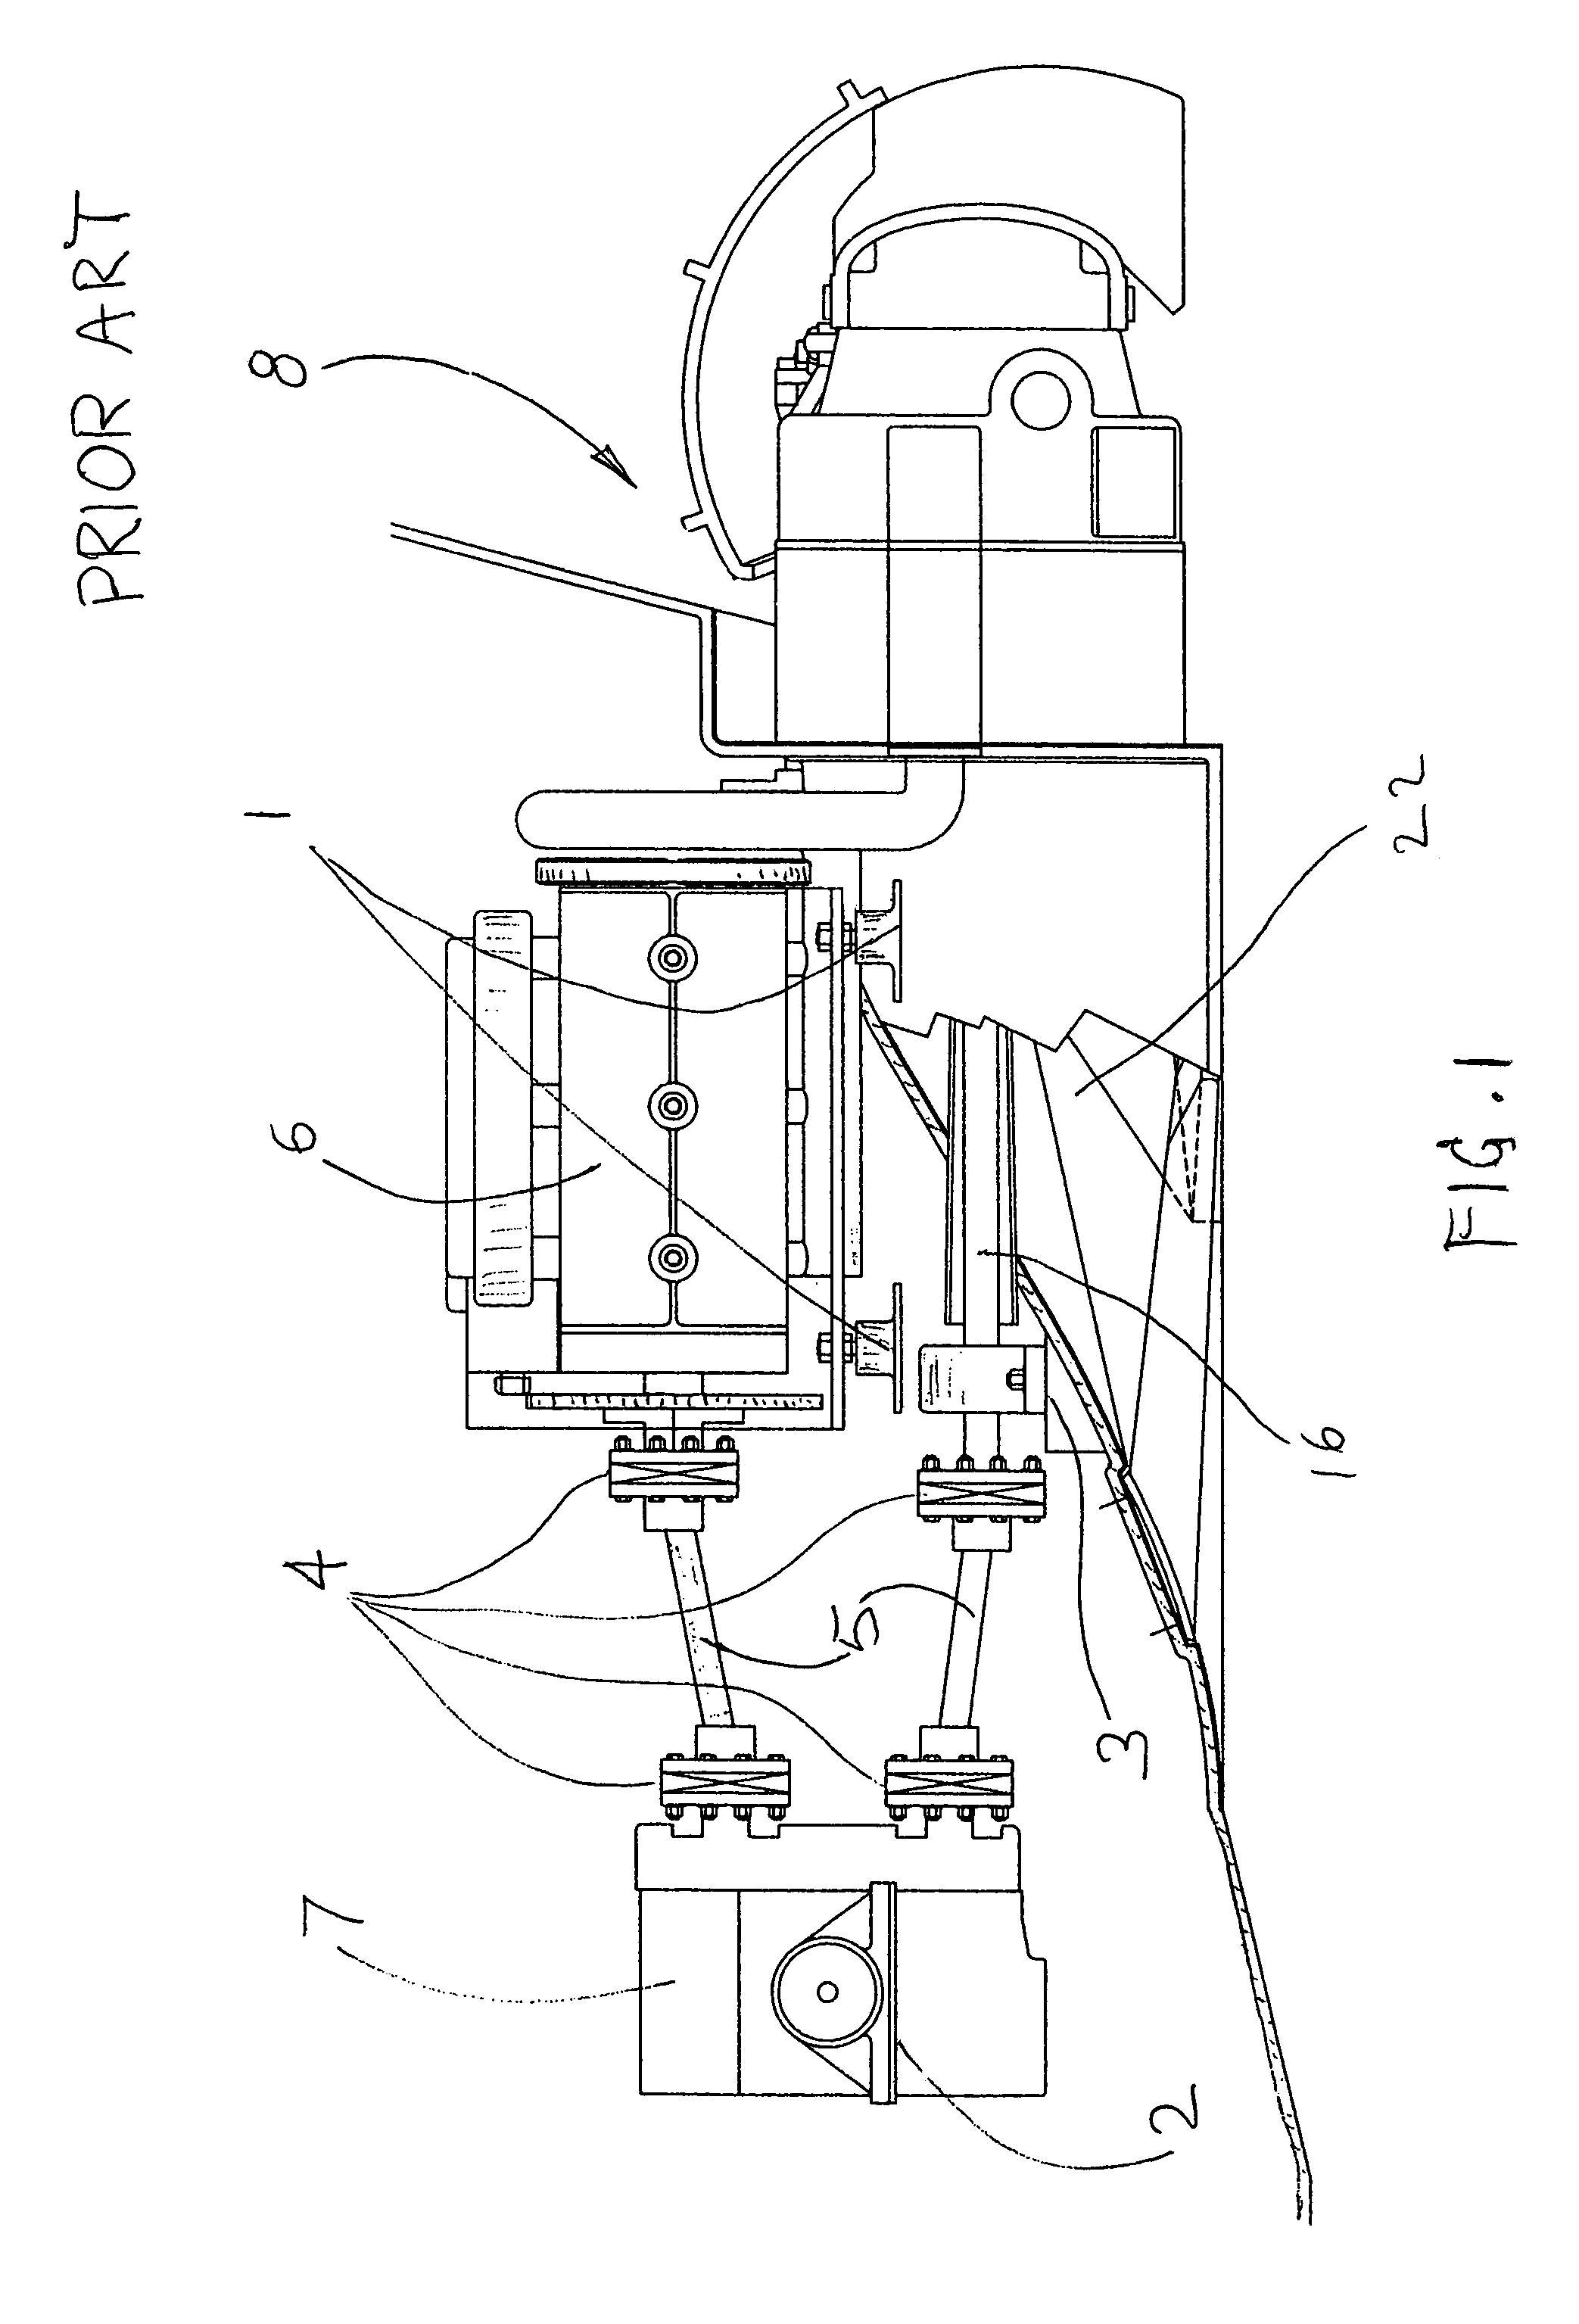 Integrated marine motor support and transmission apparatus